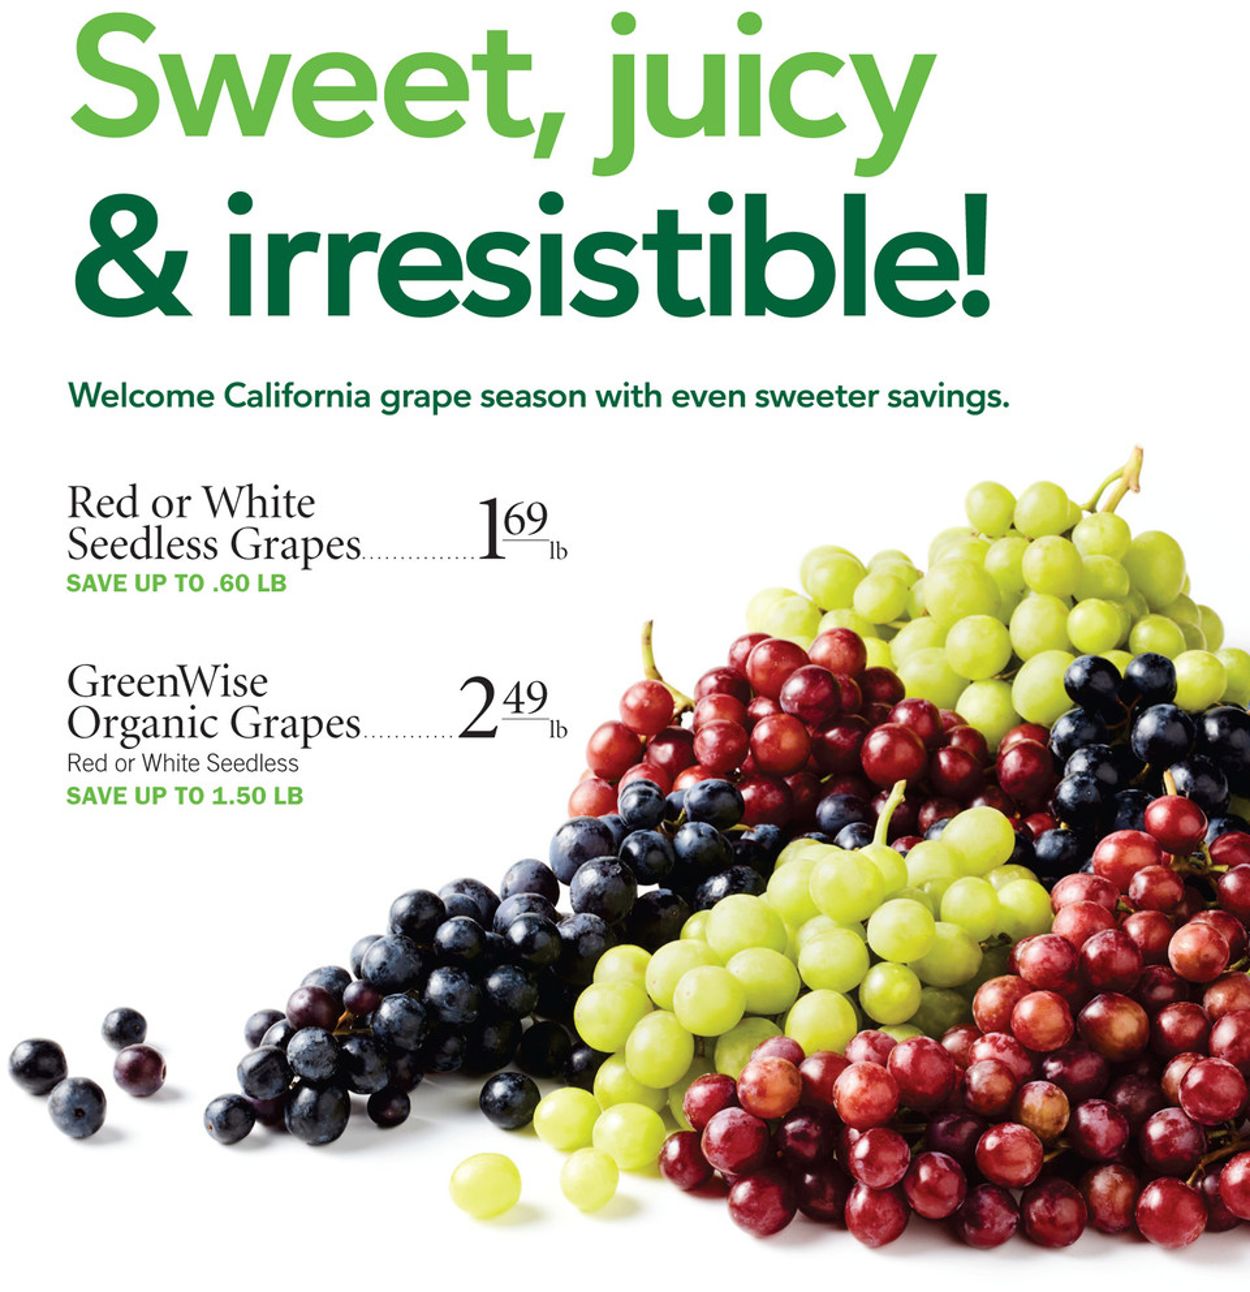 Publix Ad from 08/19/2021